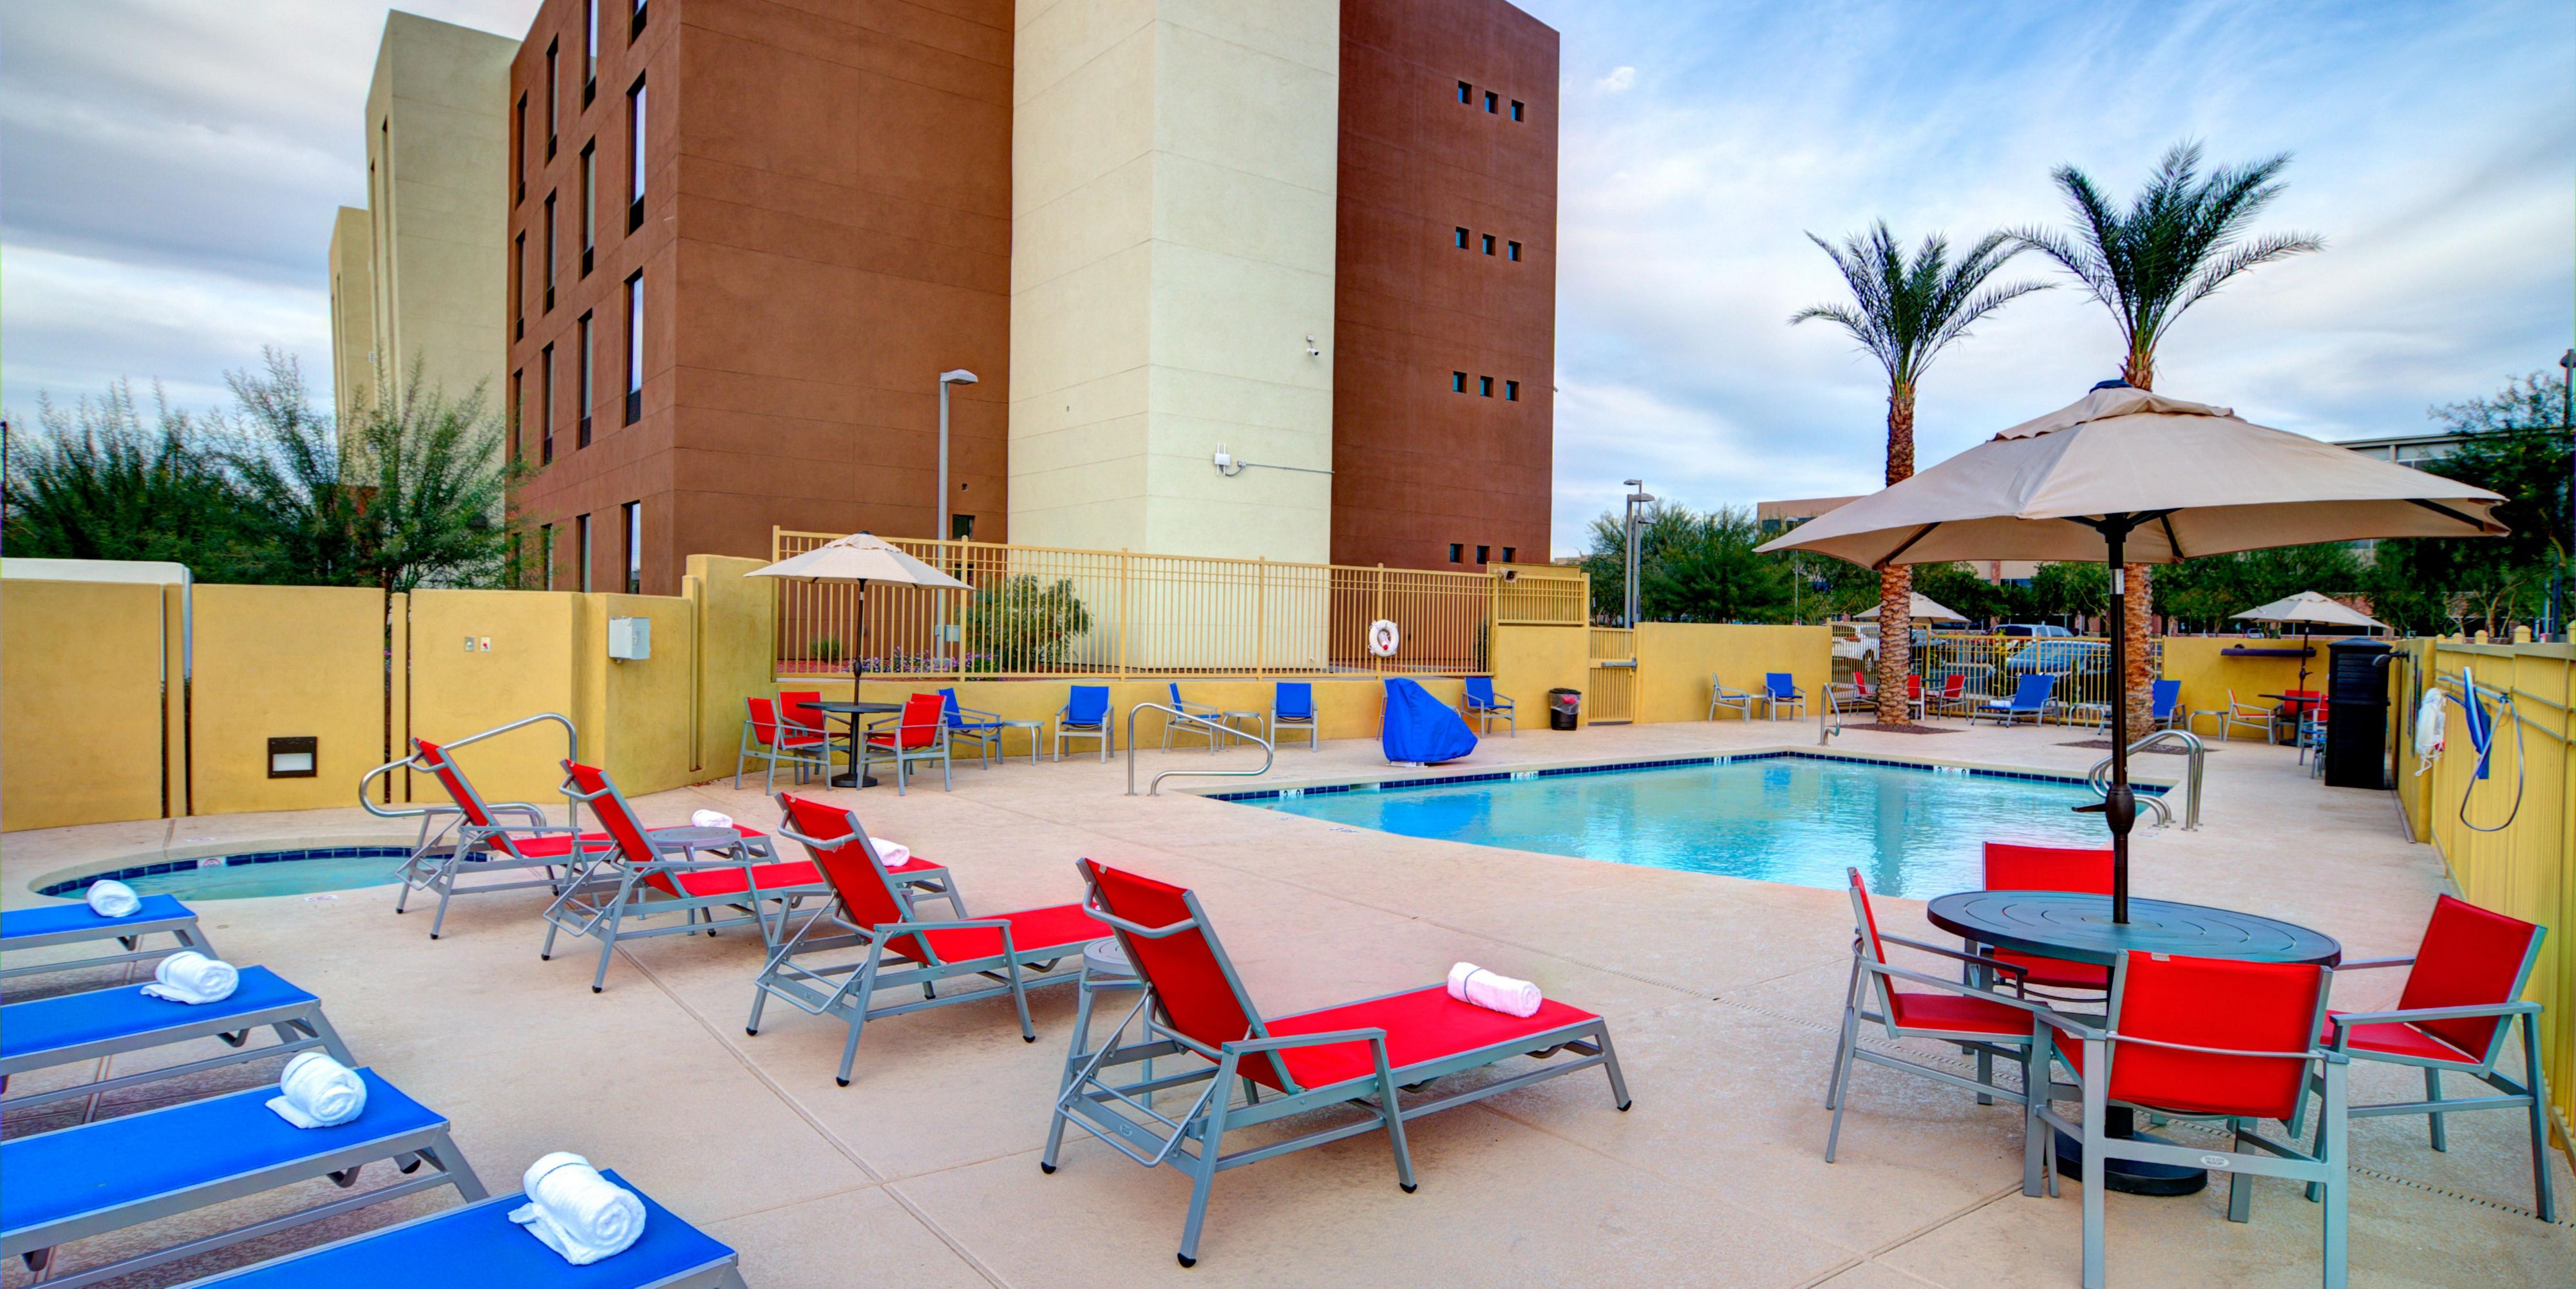 Take advantage of our outdoor pool to unwind and relax after a busy day. Our outdoor pool and spa are open from 8am to 10 pm for your convenience and enjoyment.